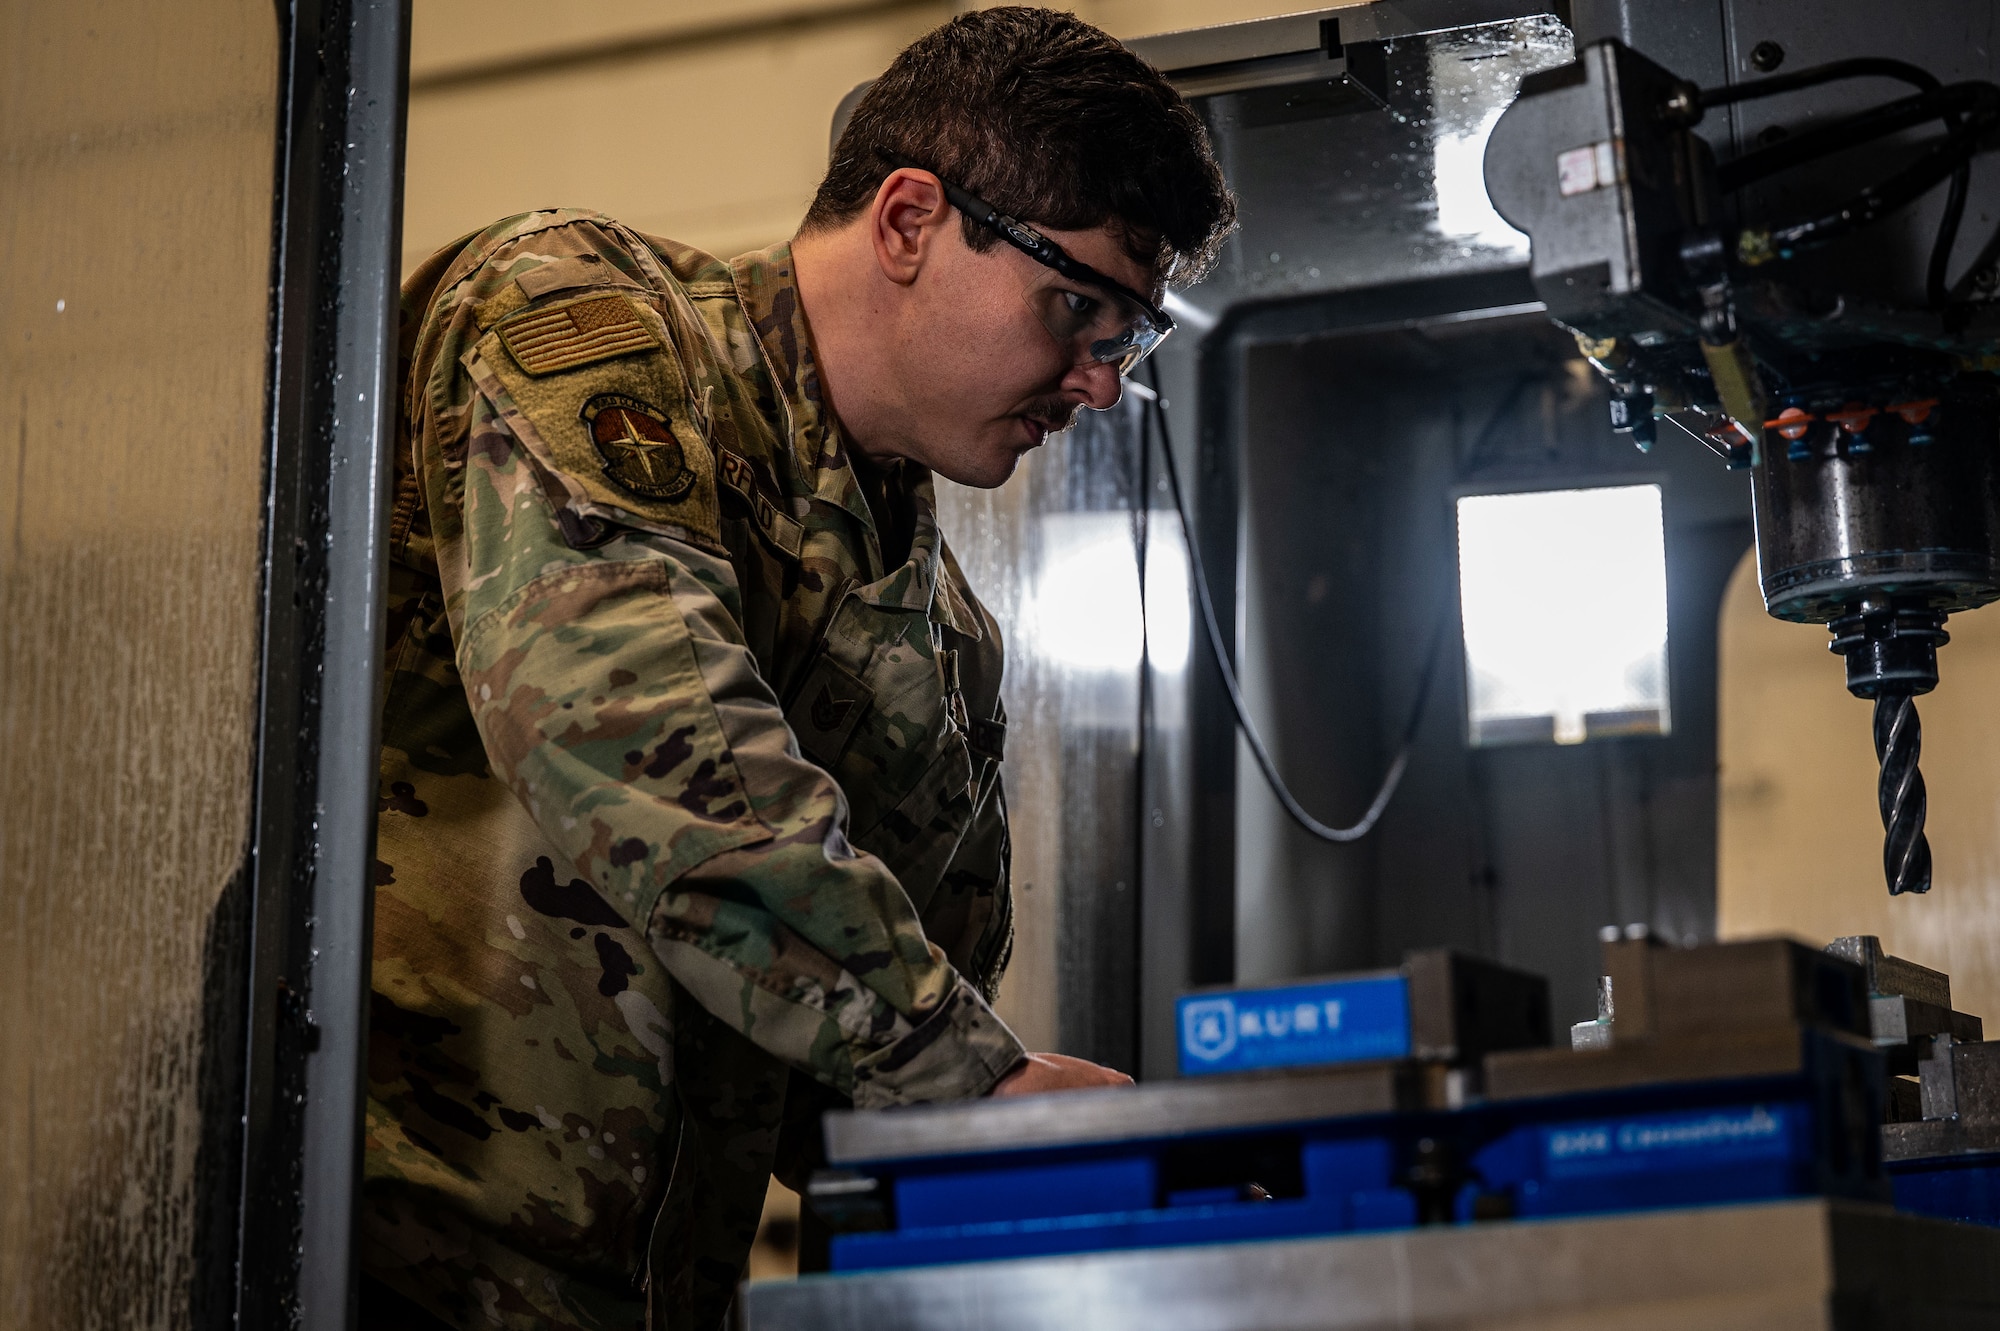 Tech. Sgt. Jordan Barfield, 305th Maintenance Squadron aircraft metals technician, operates a computer numerical control machine to fabricate C-17 Globemaster III components at Joint Base McGuire-Dix-Lakehurst, N.J., Feb 15, 2024. Maintainers from the 305th MXS completed a five-month fabrication project for a damaged C-17, reaffirming Air Mobility Command’s strategic advance and rapid global mobility. (U.S. Air Force photo by 2nd Lt. Alexis Kula)